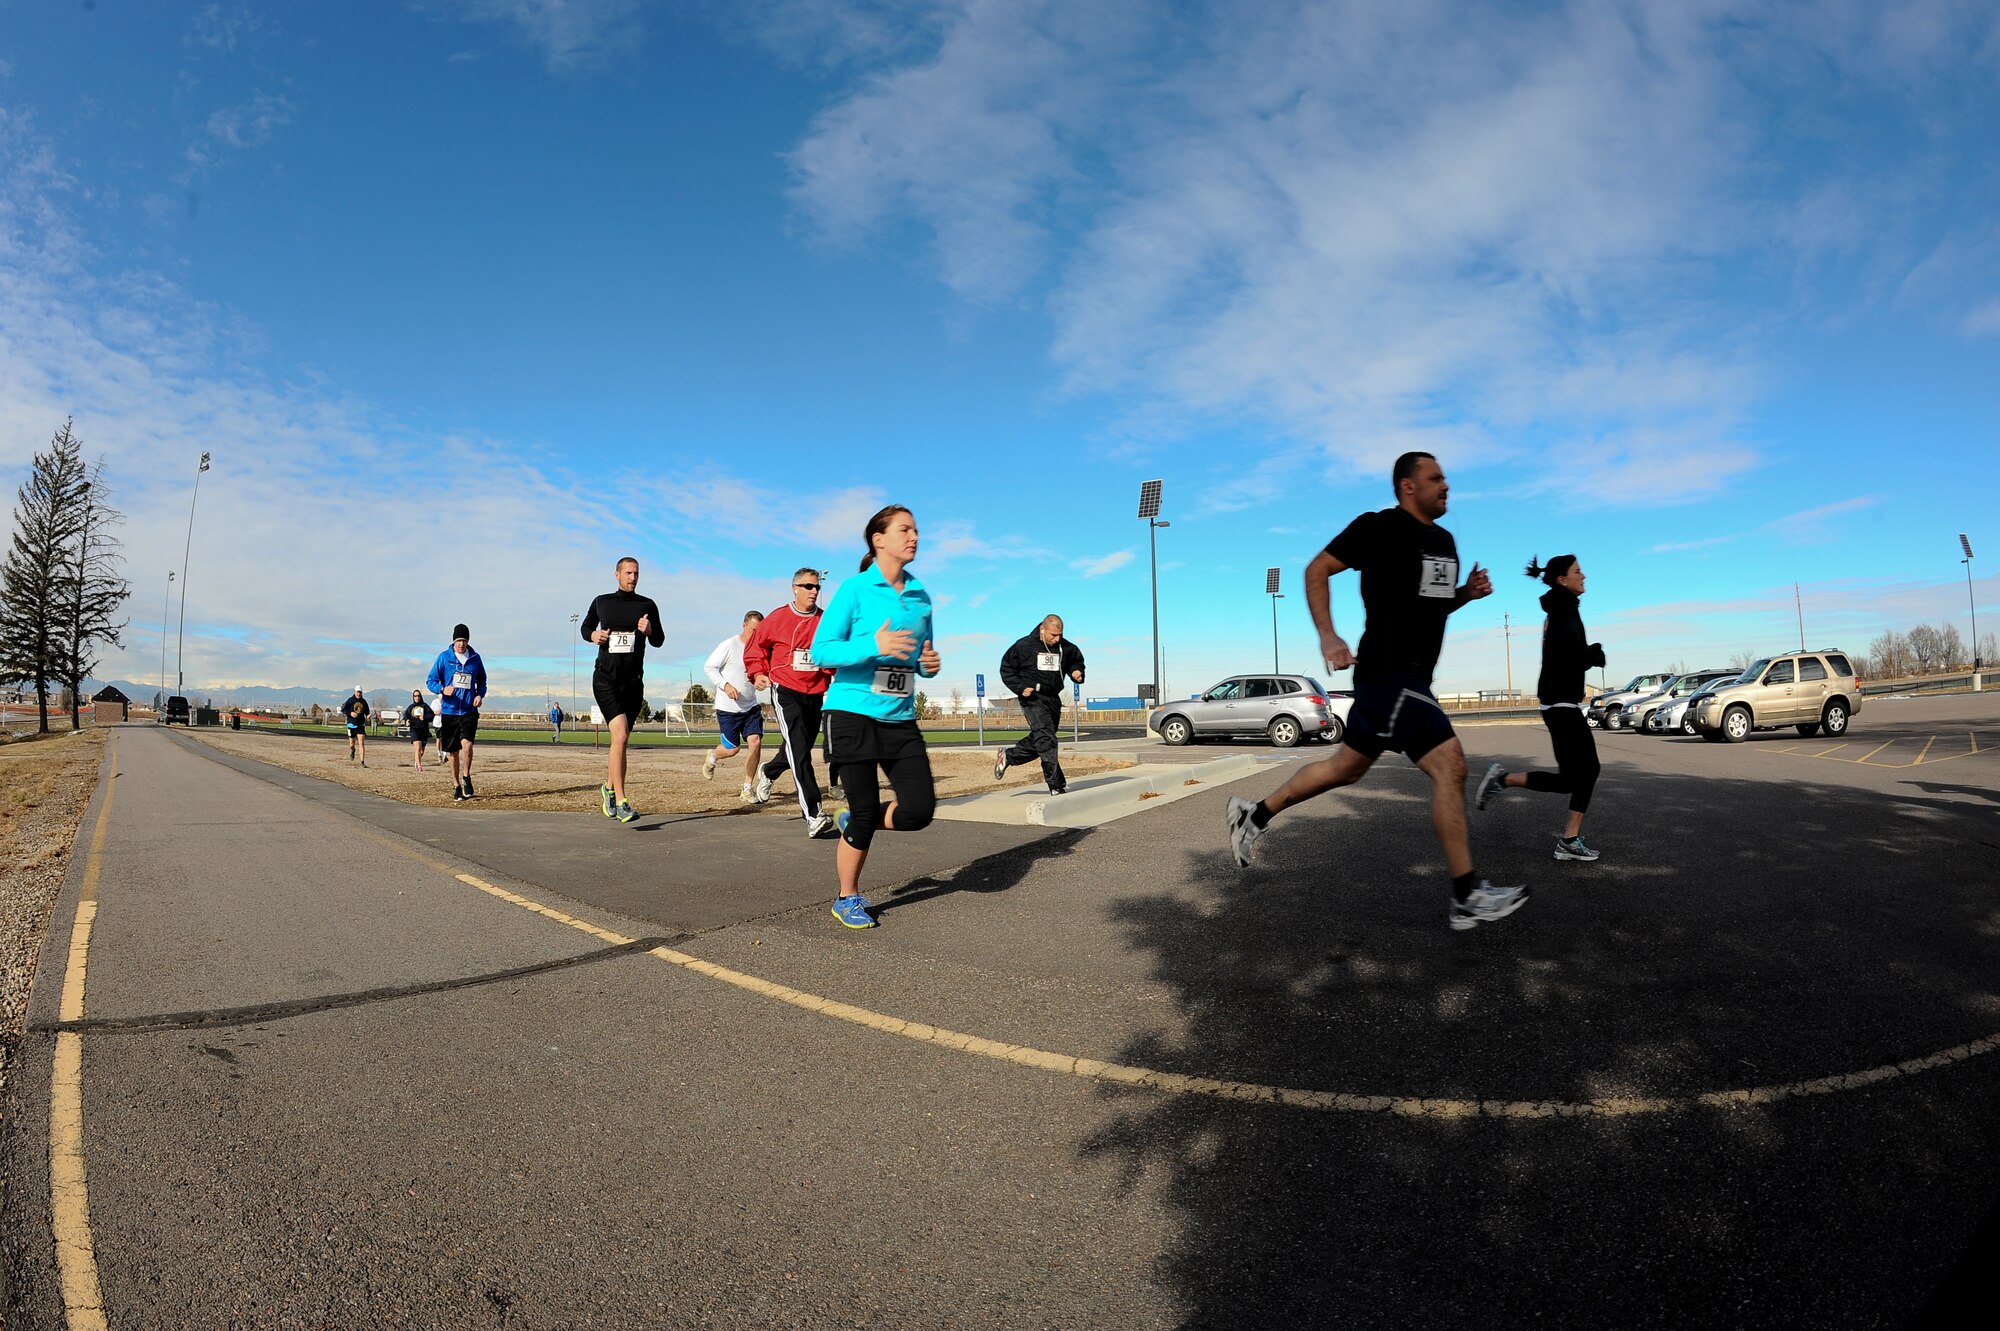 Members of Team Buckley begin the 9th Annual Turkey Trot 5K race Nov. 26, 2013, at the all-purpose field on Buckley Air Force Base, Colo. The fastest runners in each category were given turkeys as prizes. (U.S. Air Force photo by Senior Airman Phillip Houk/Released)